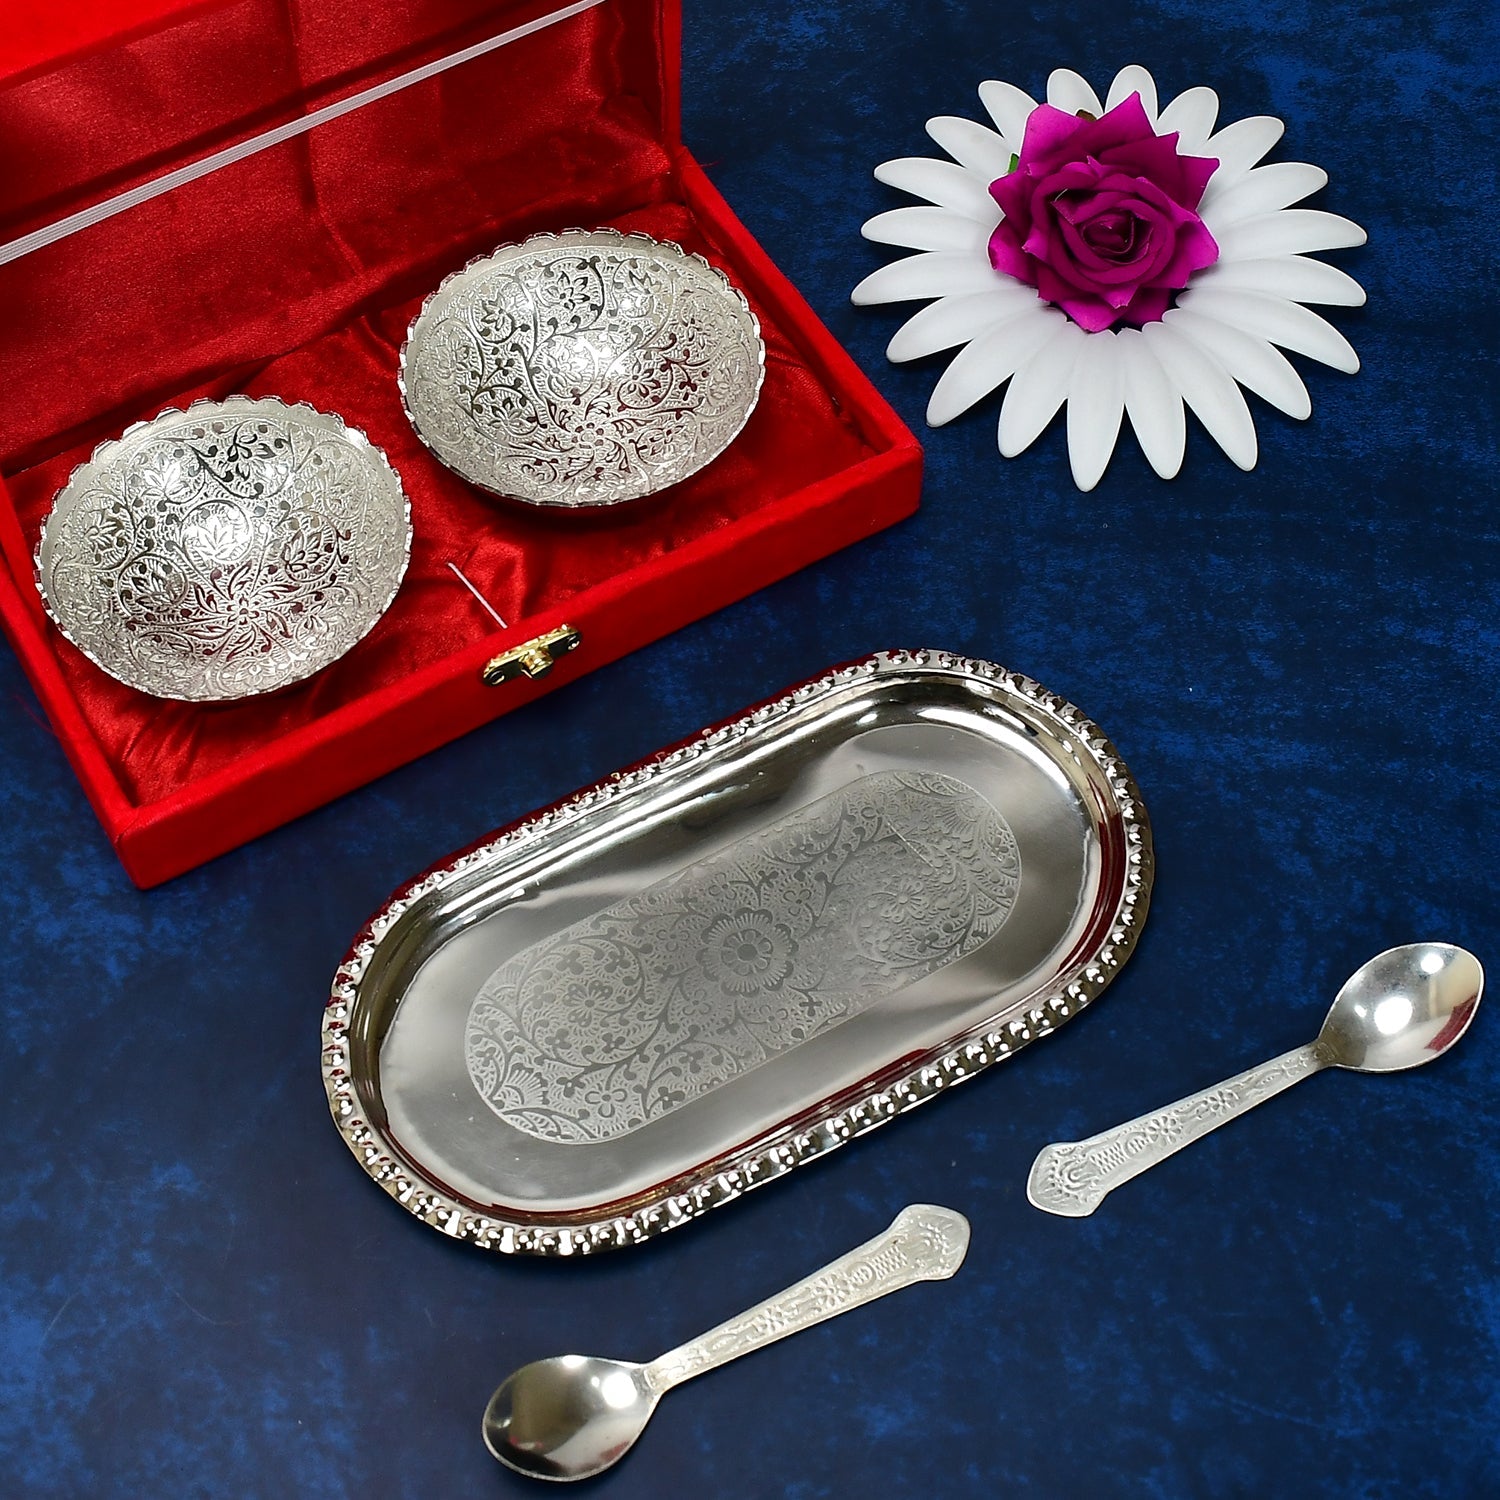 2947A Silver Plated 2 Bowl 2 Spoon Tray Set Brass with Red Velvet Gift Box Serving Dry Fruits Desserts Gift DeoDap